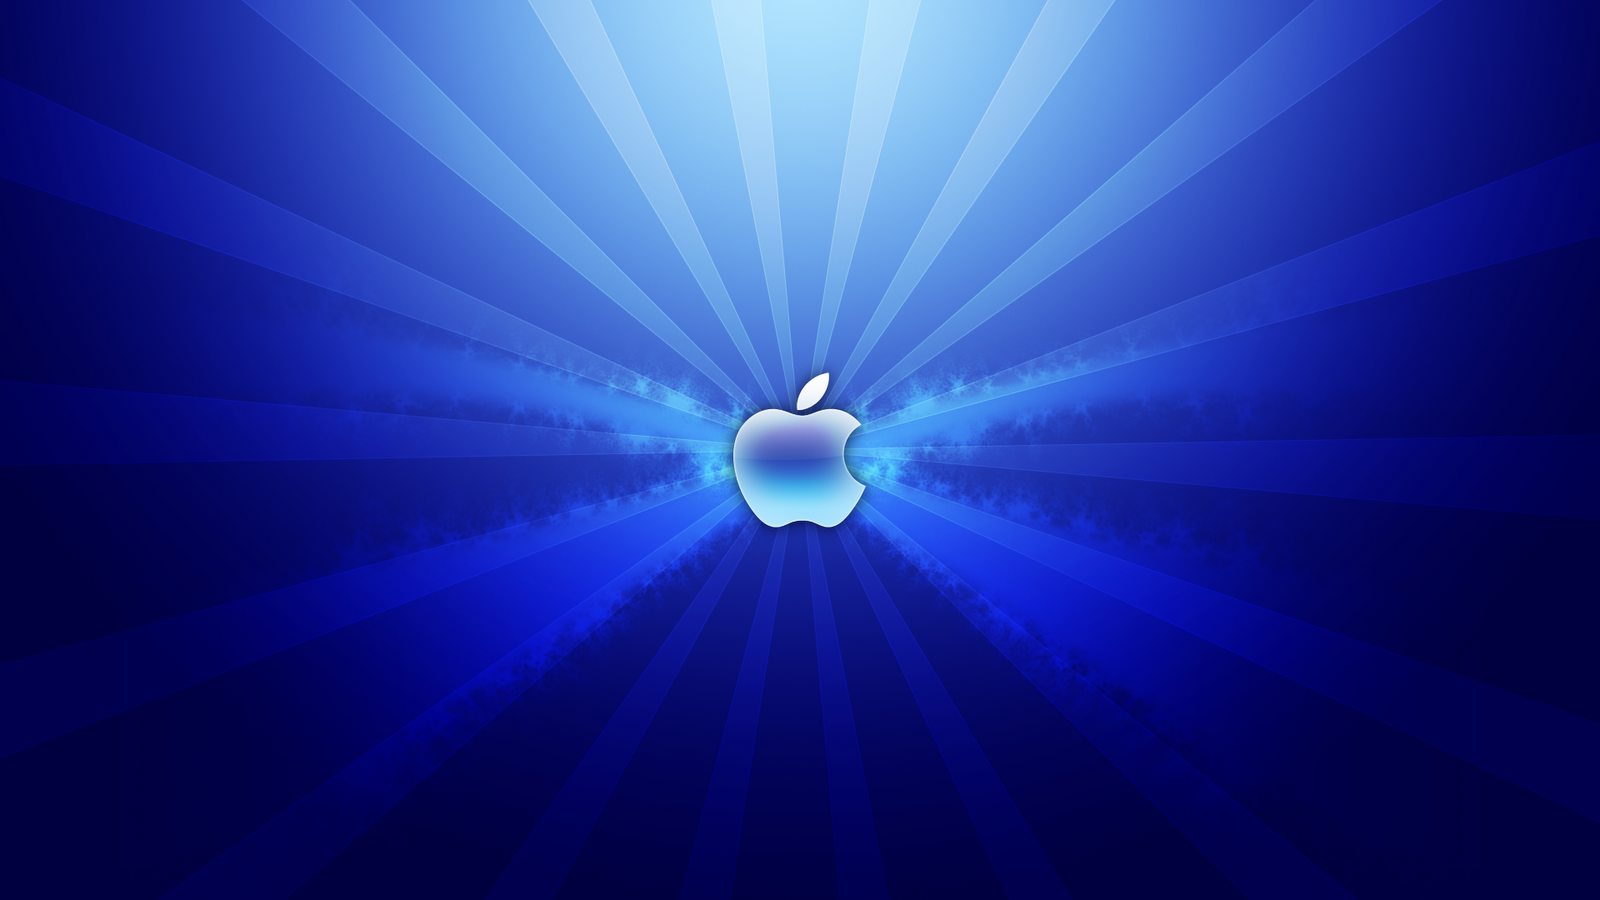 Free download laptop wallpaper here you can see light blue apple laptop wallpaper [1600x1000] for your Desktop, Mobile & Tablet. Explore Cool Desktop Background For Mac. Cool Wallpaper For